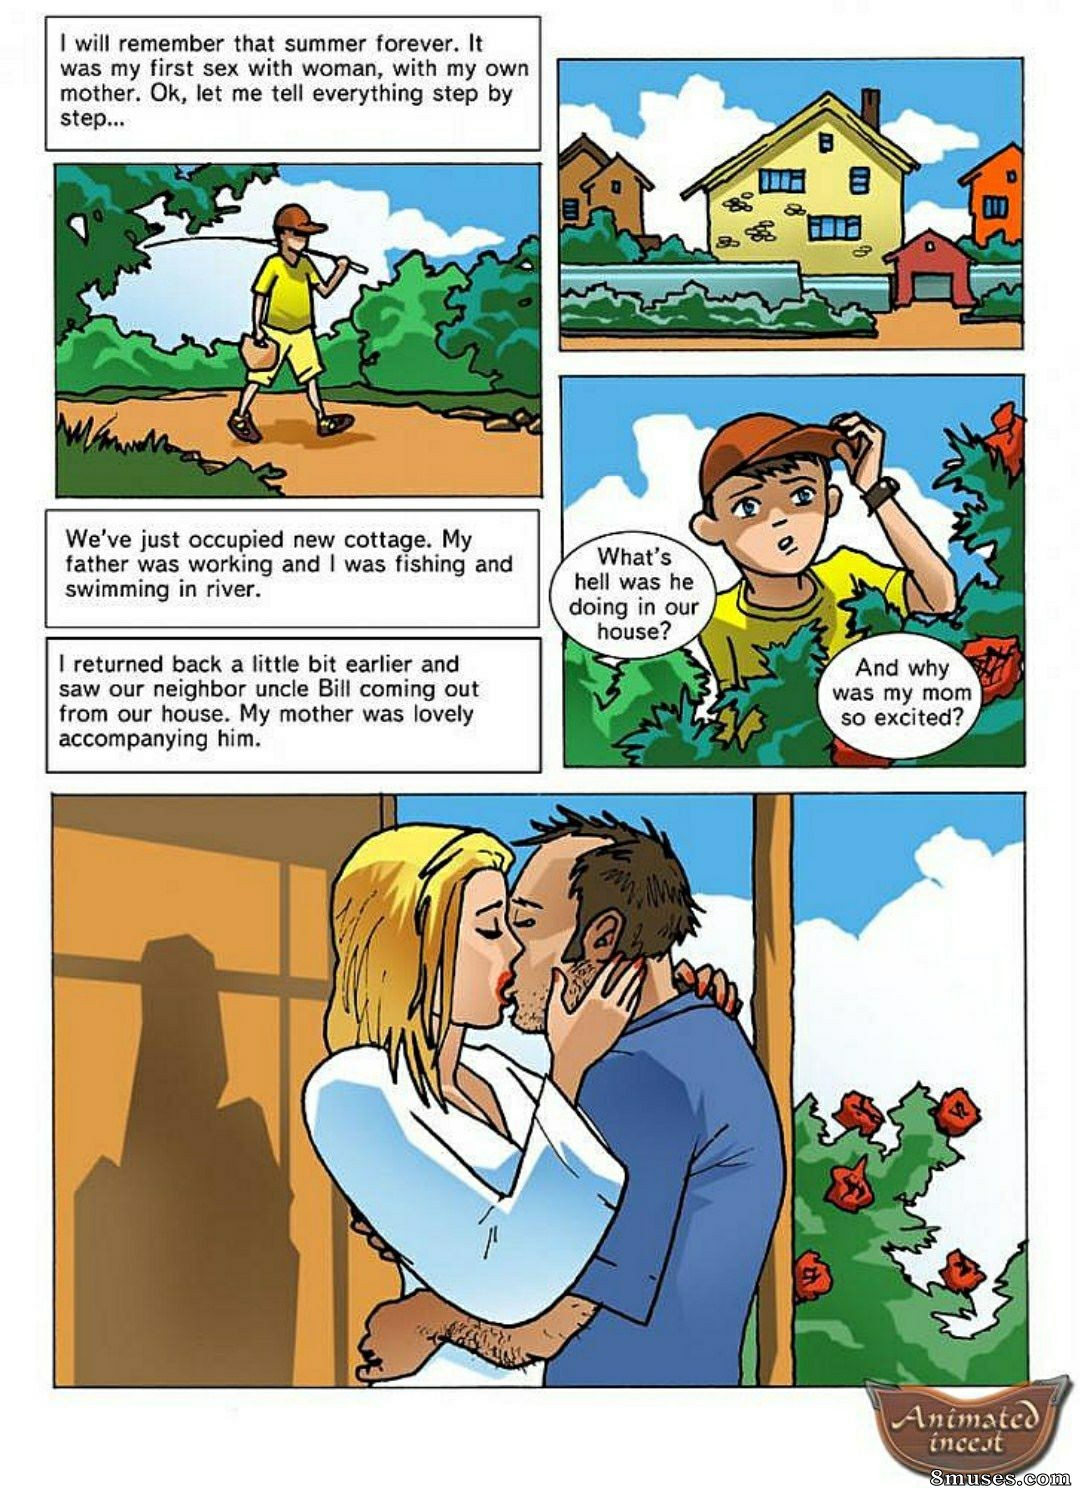 Xxx Saw - He saw everything Issue 1 - 8muses Comics - Sex Comics and Porn Cartoons